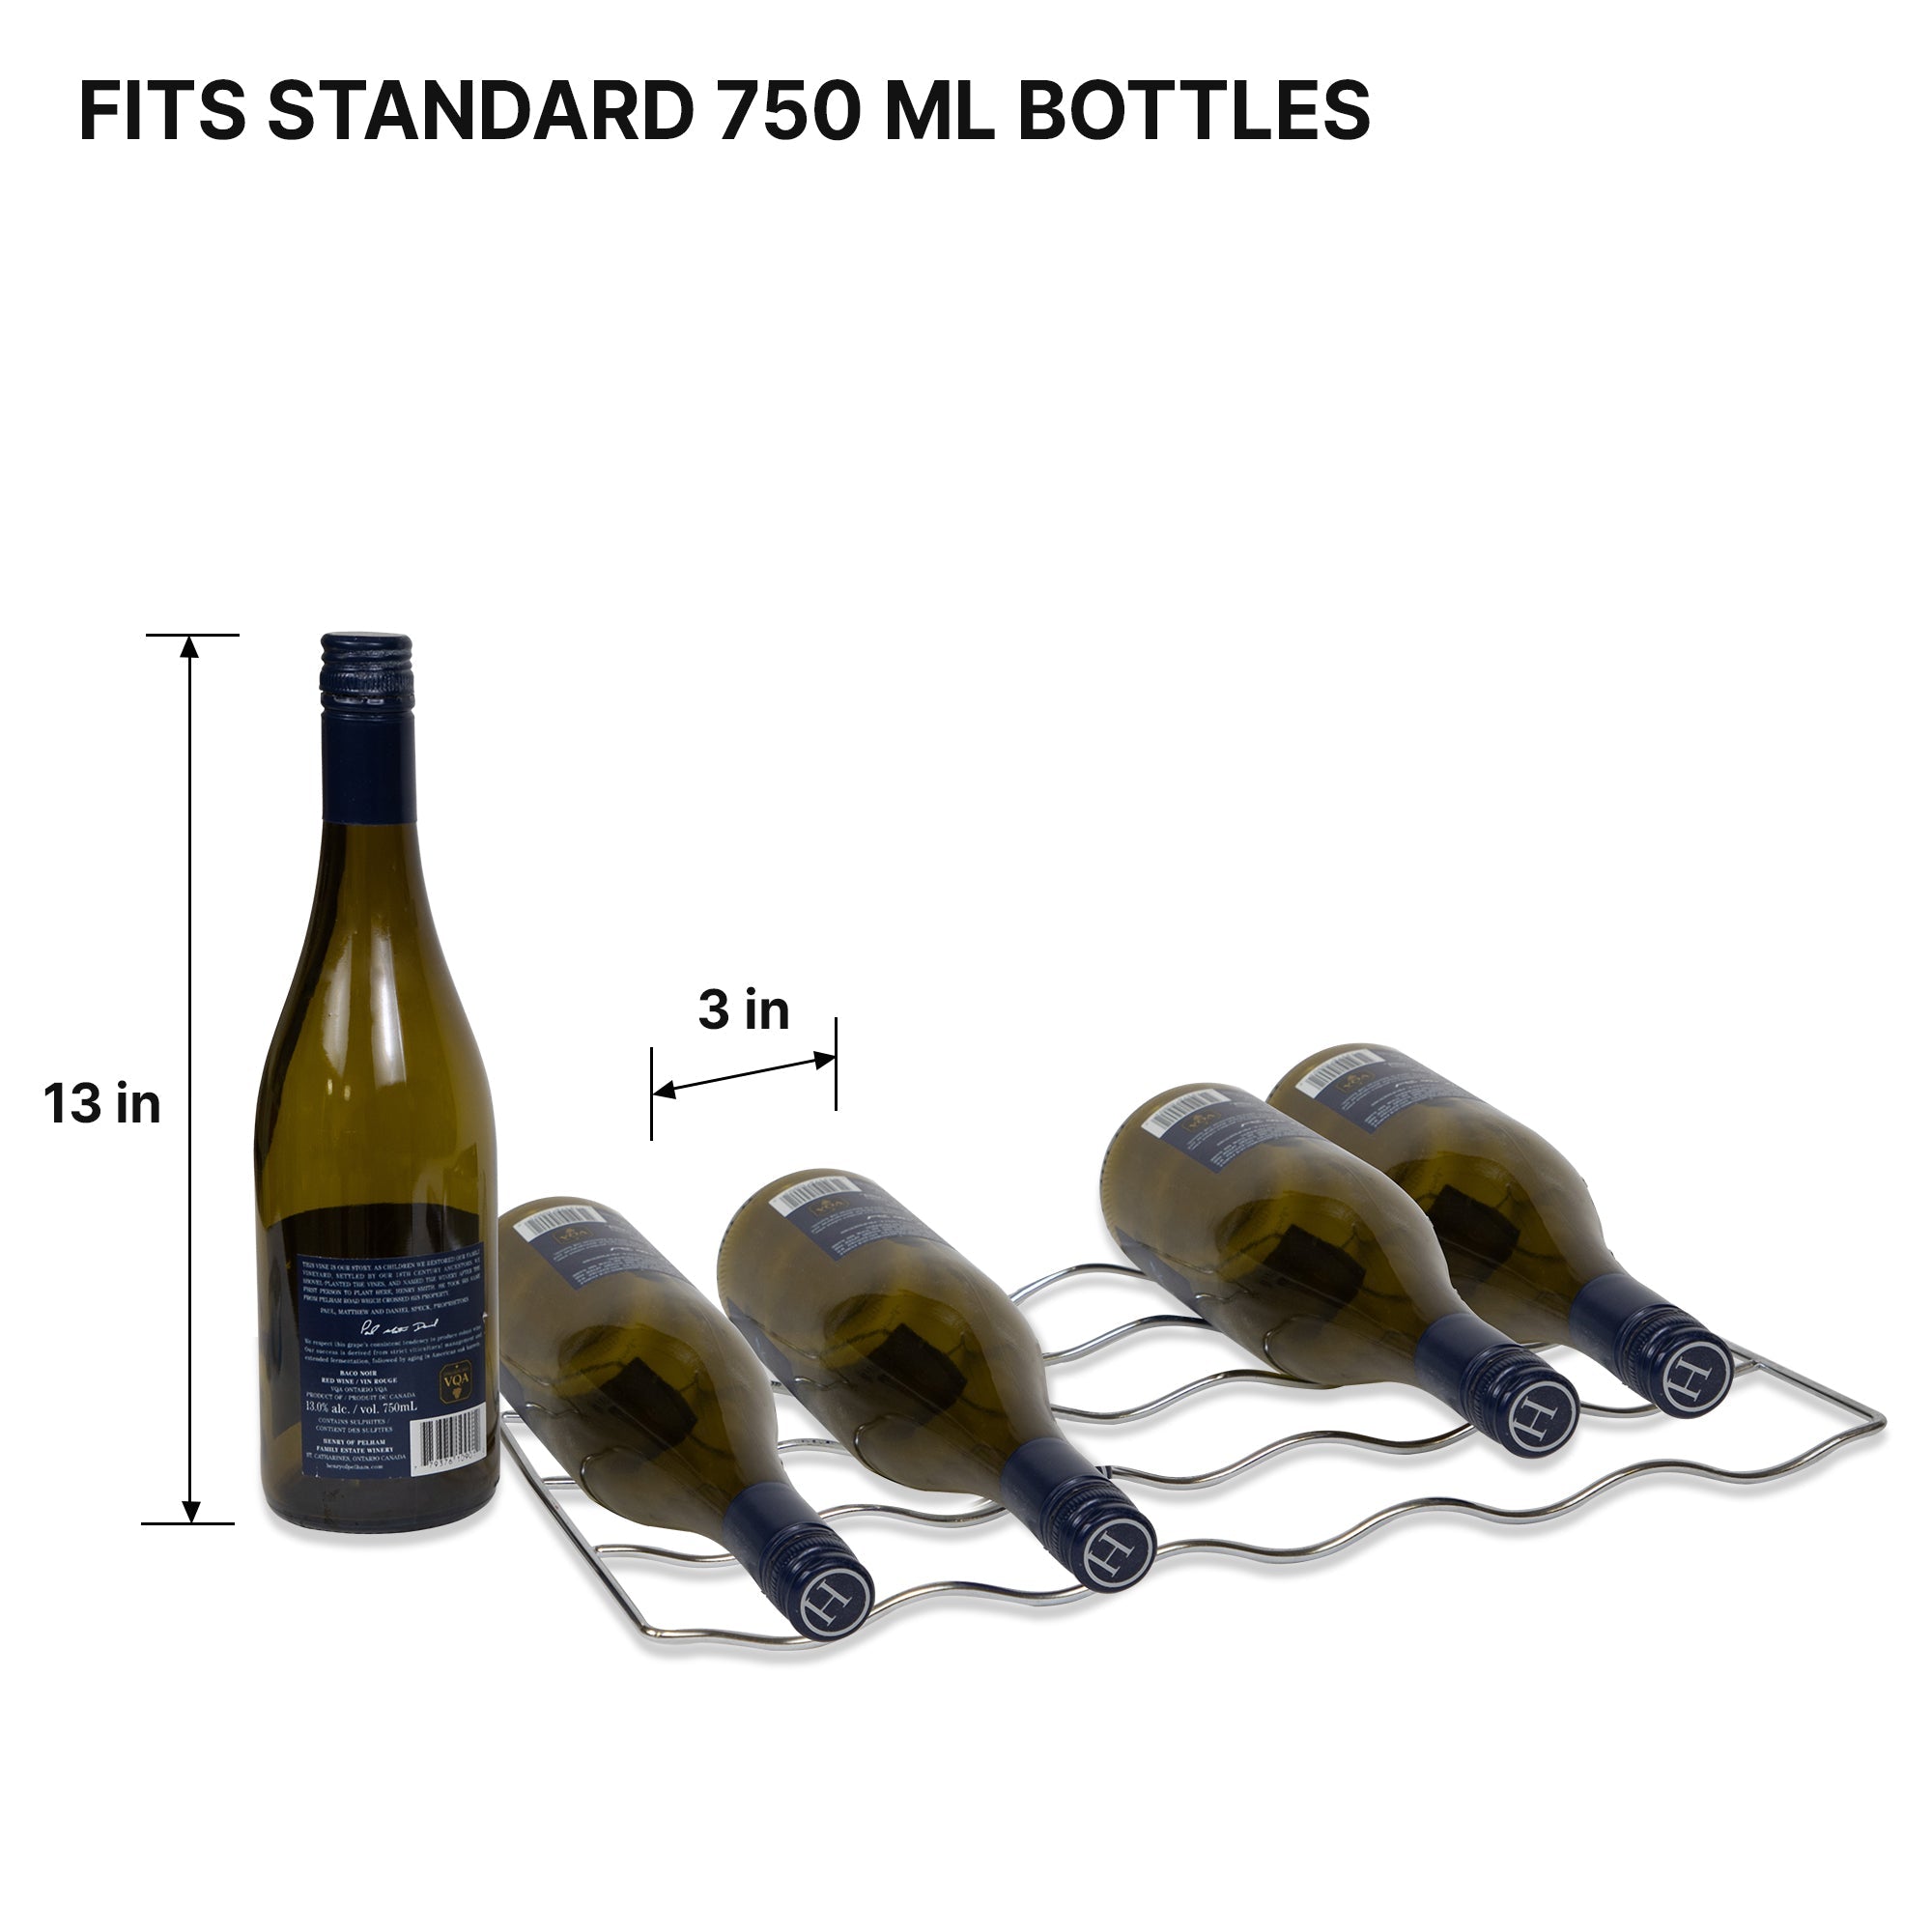 Removable wire rack from Koolatron 29 bottle wine chiller with dimensions labeled and four wine bottles lying on it and one standing up beside it. Text above reads "Fits standard 750 mL bottles"